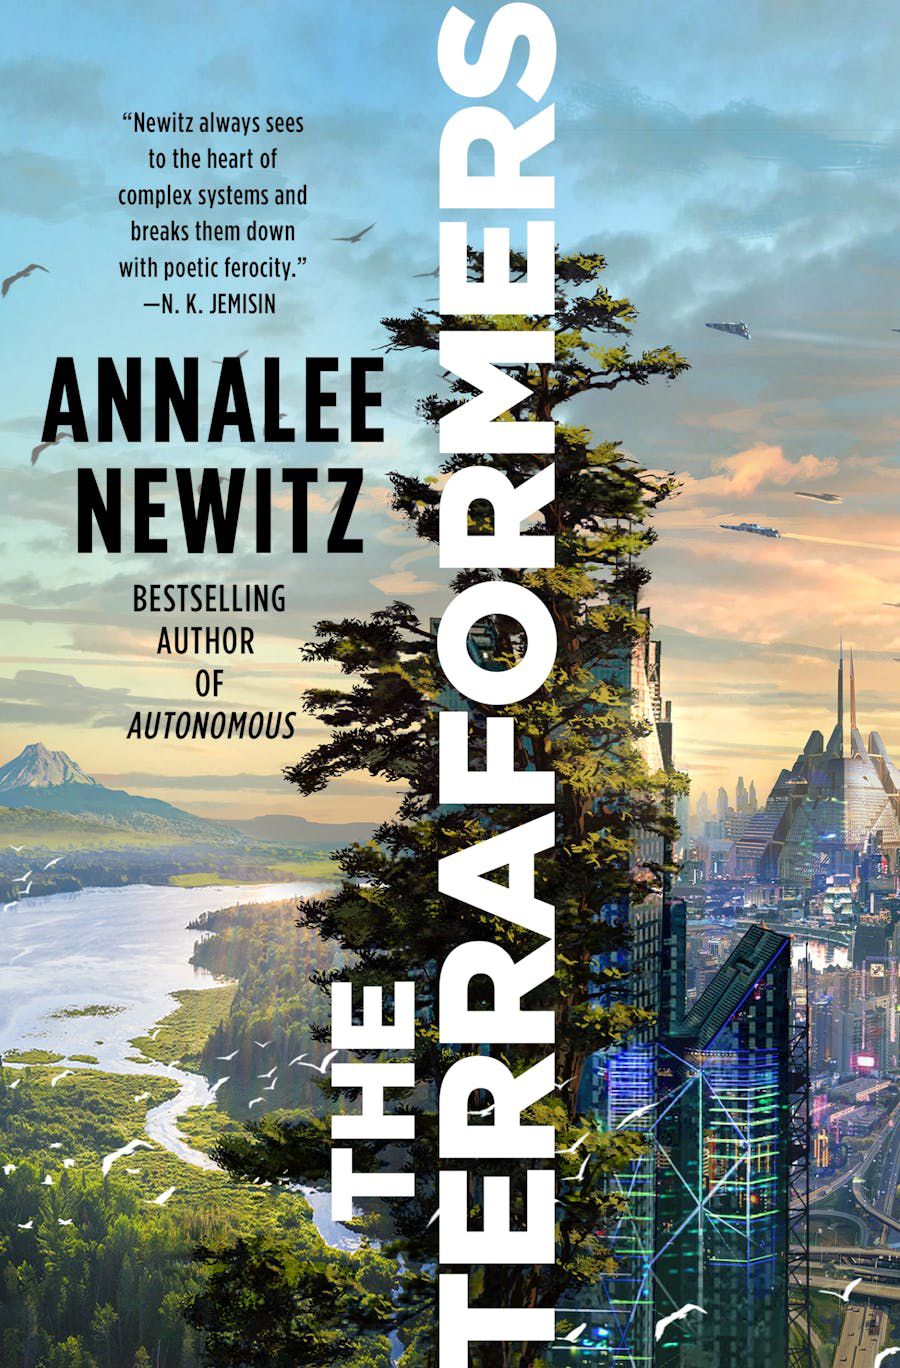 Cover image for Annalee Newitz’s The Terraformers, which features a futuristic cityscape with lush greenery.